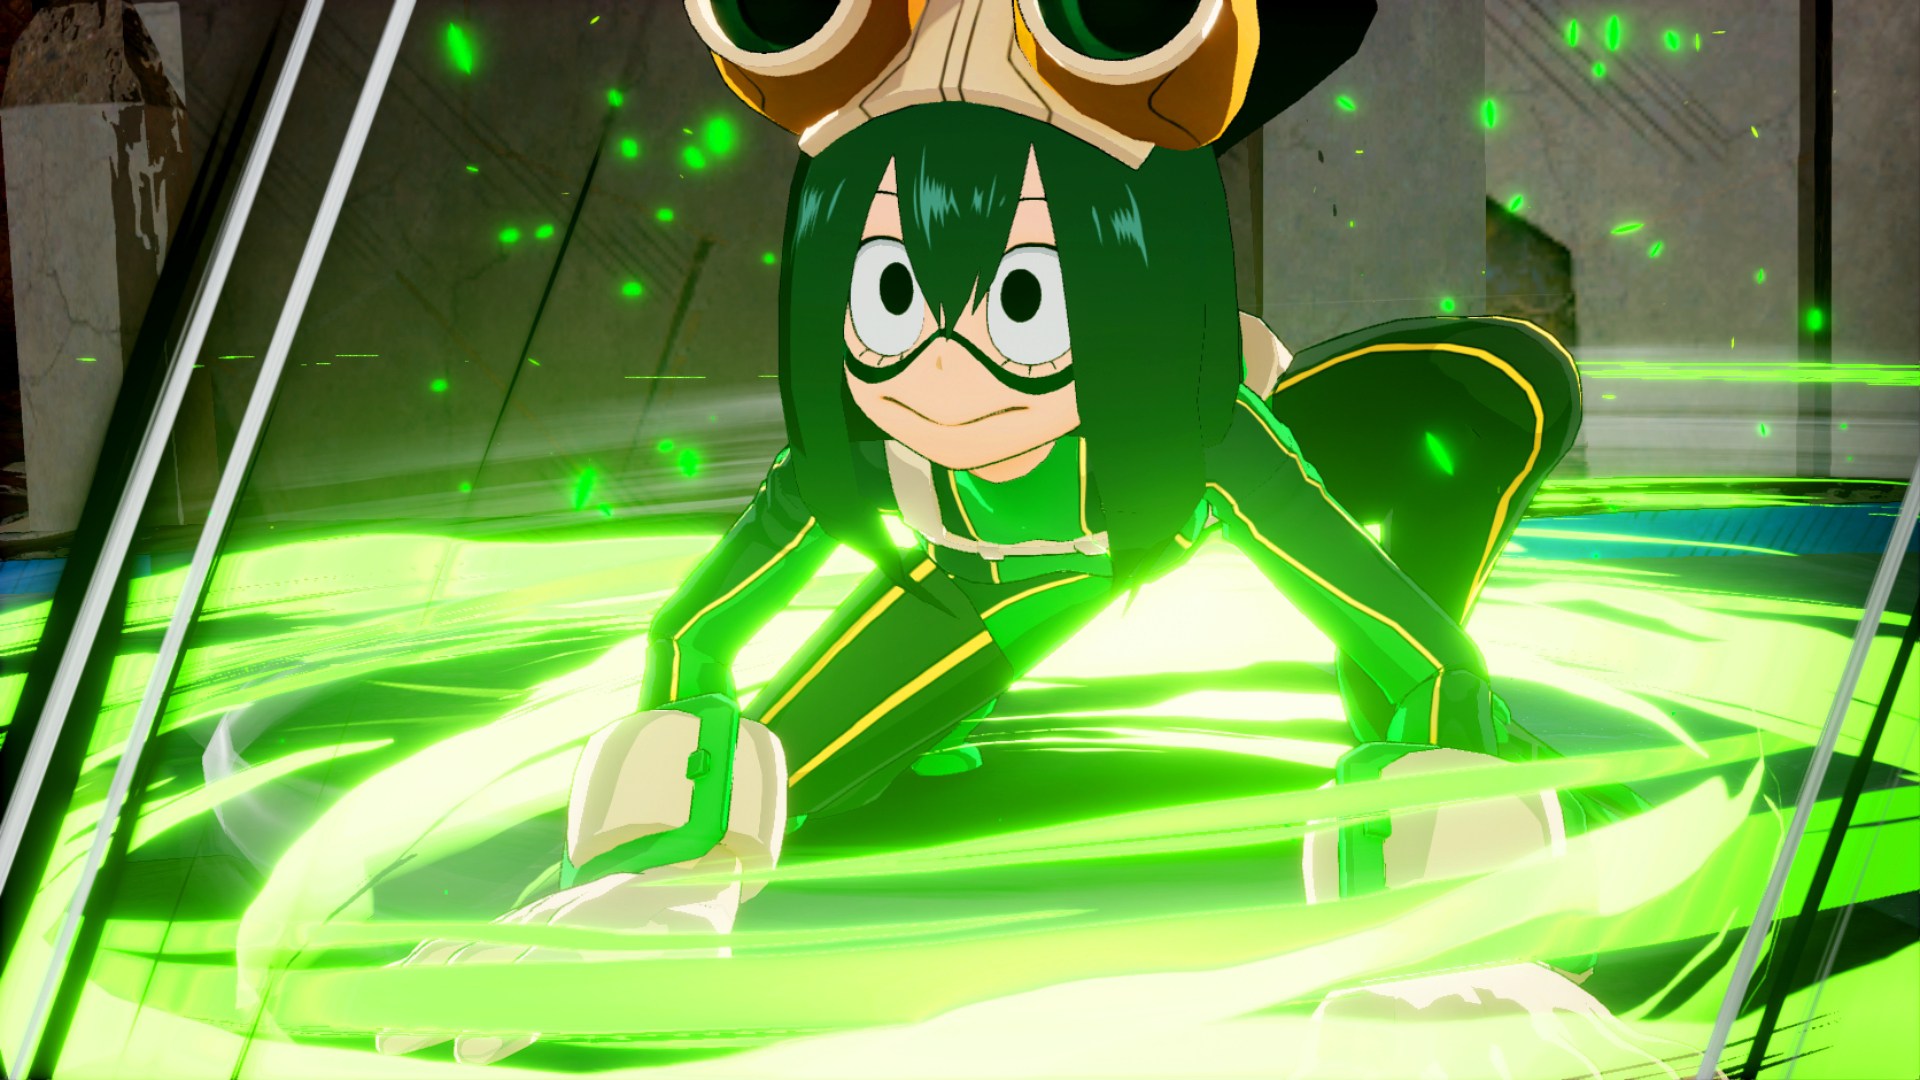 My Hero Academia: One's Justice - 3 new characters revealed (Tsuyu Asui